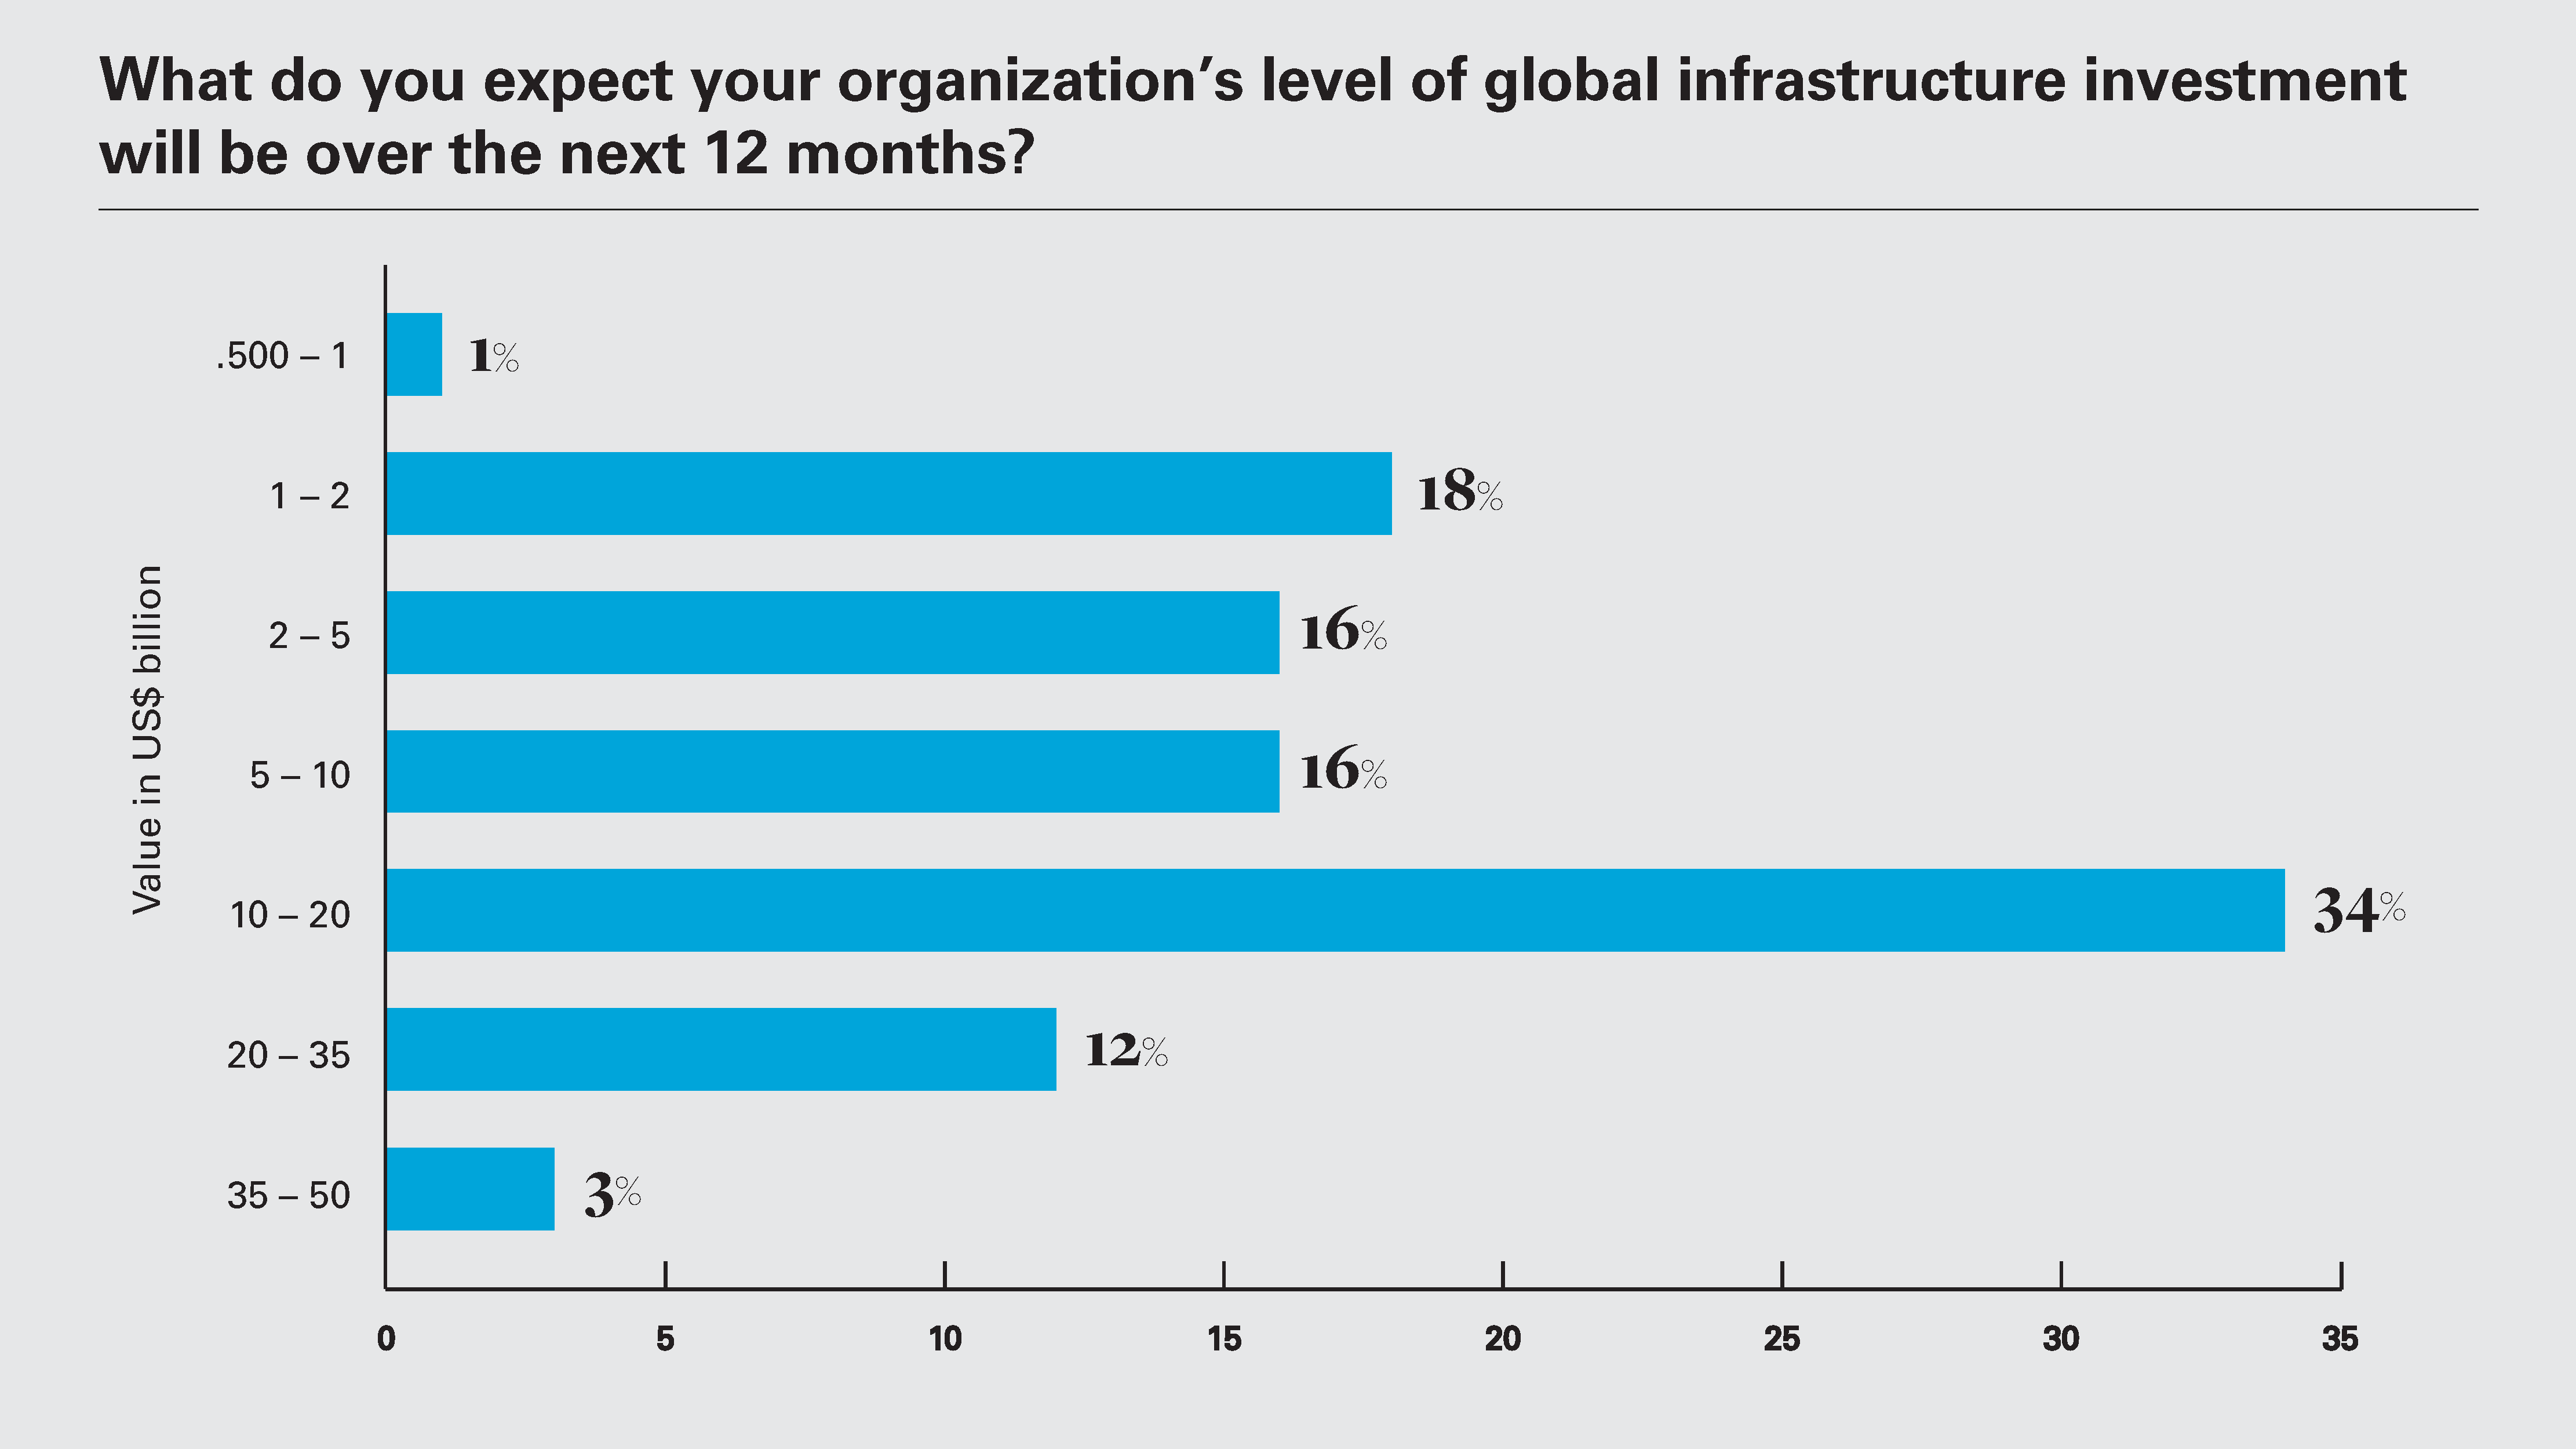 What do you expect your organization’s level of global infrastructure investment will be over the next 12 months